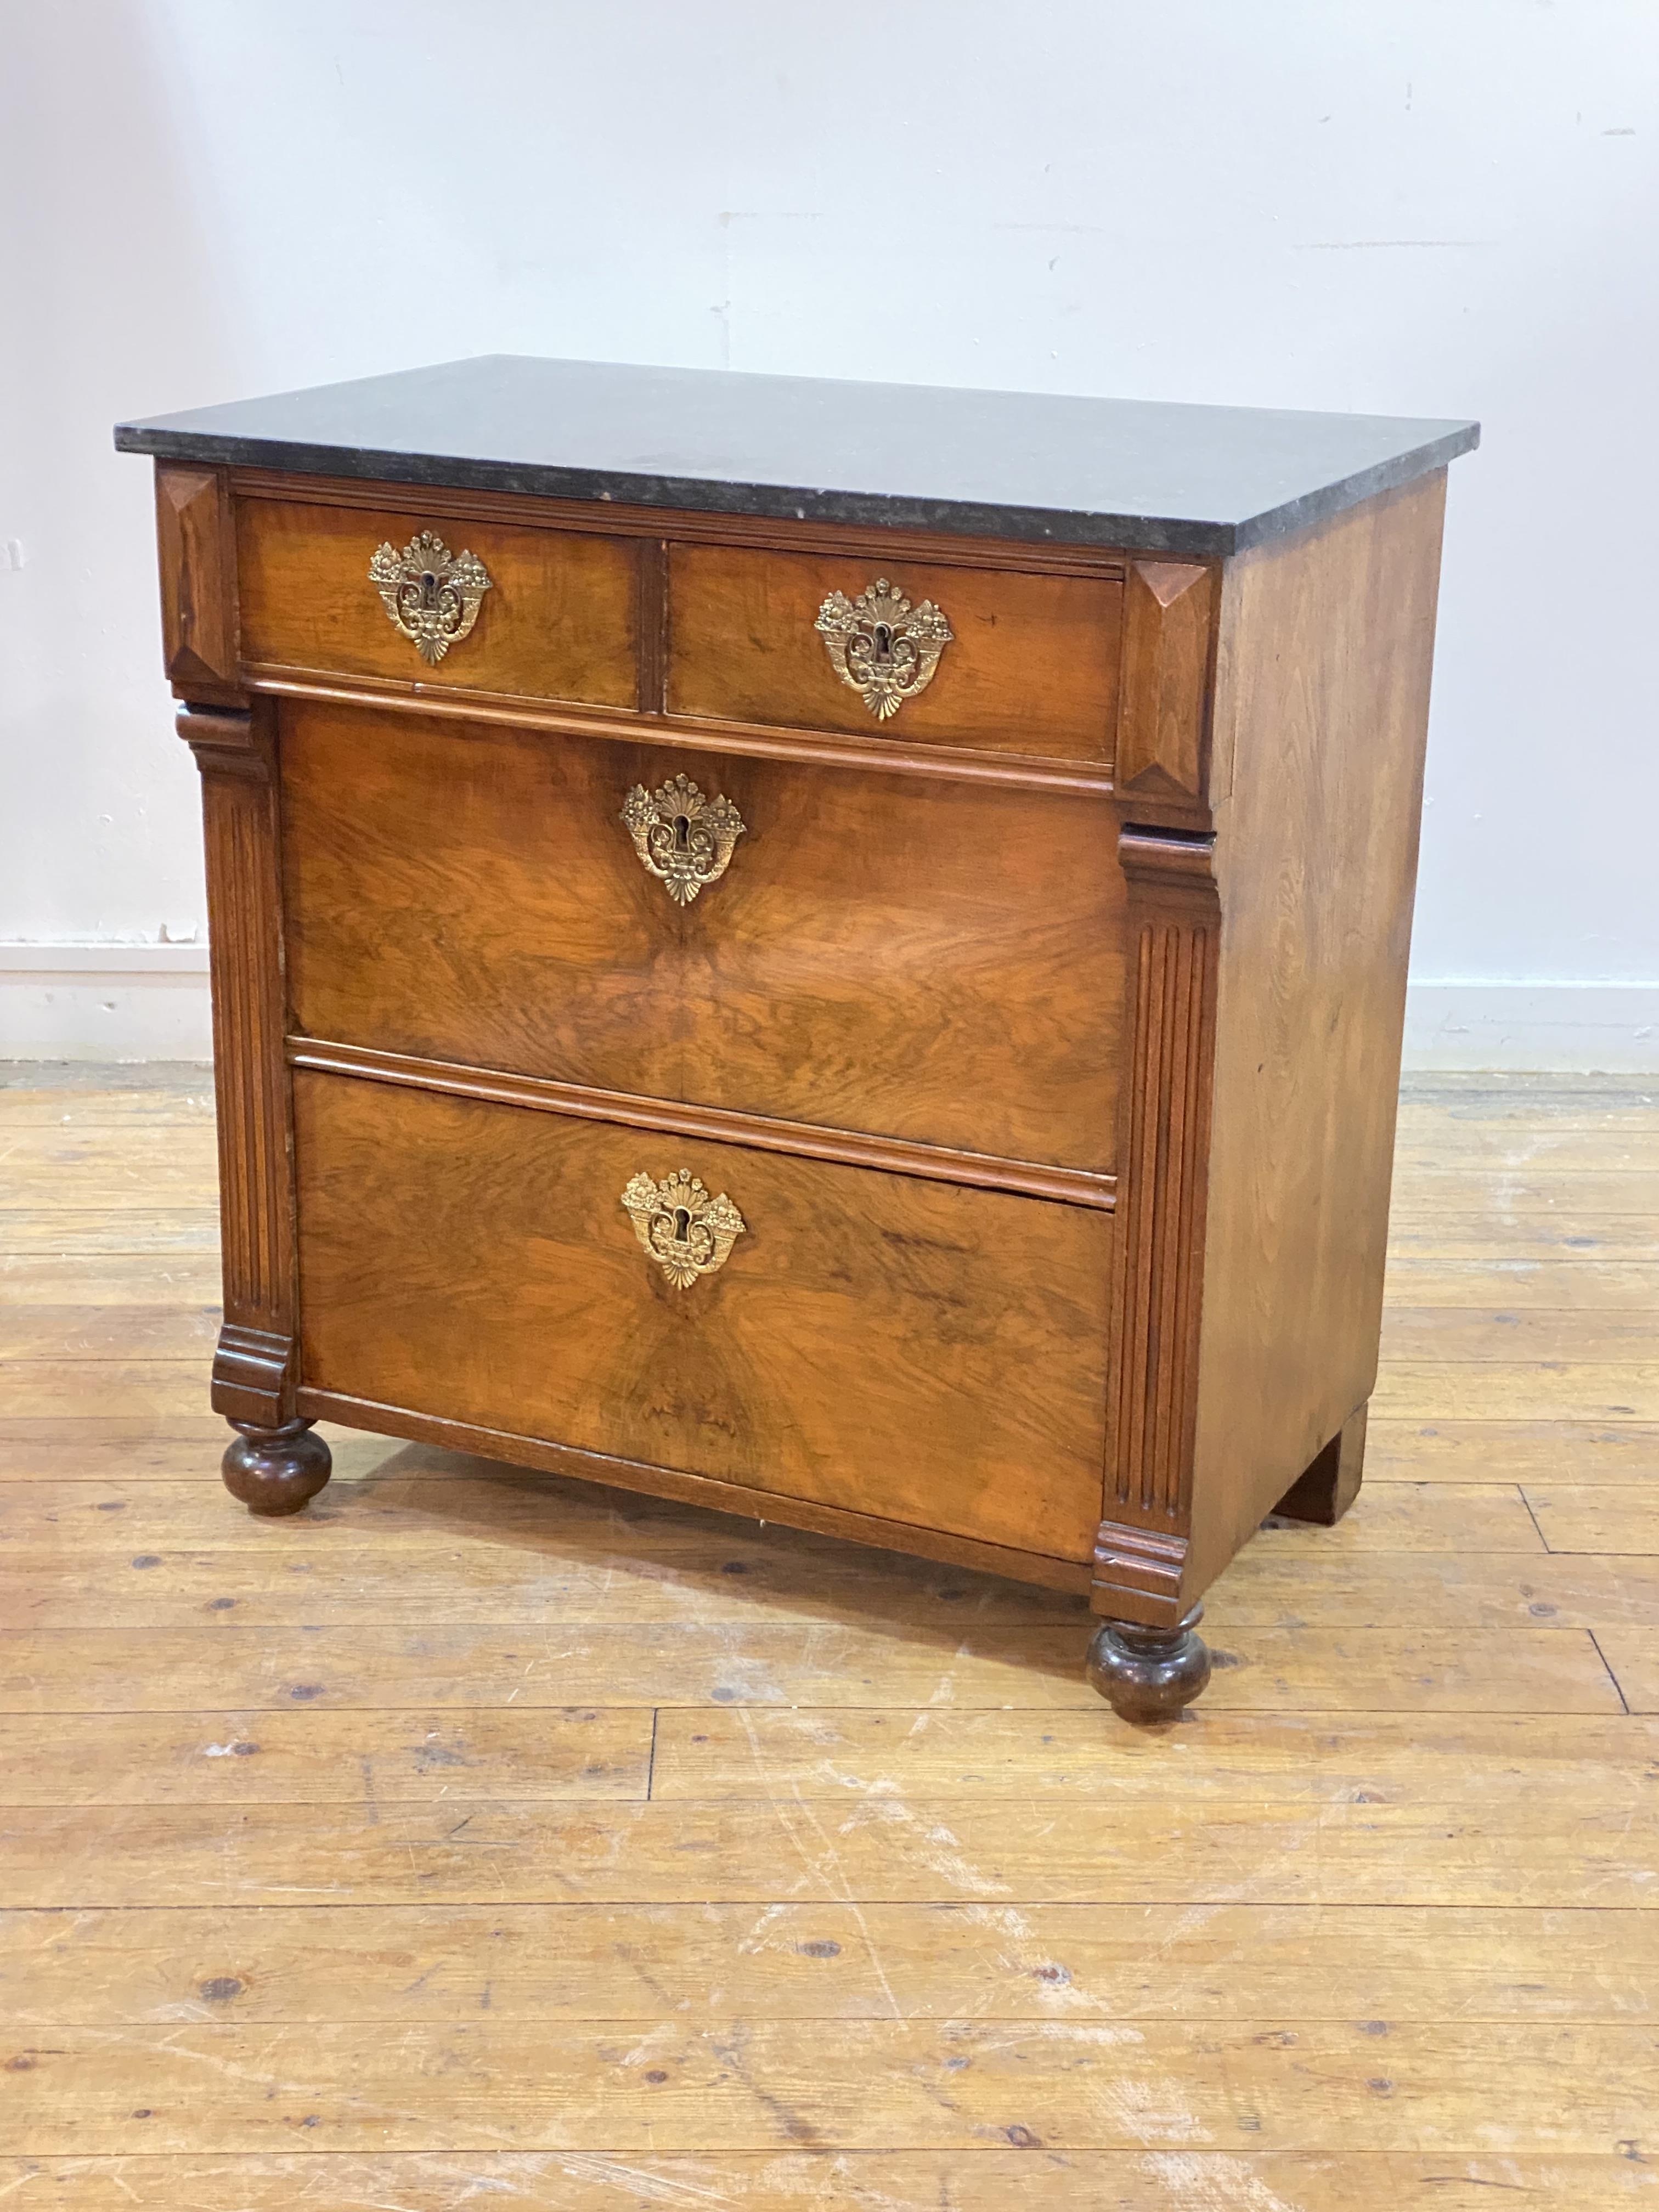 A late 19th century French walnut commode in the Empire taste, the black variegated marble top